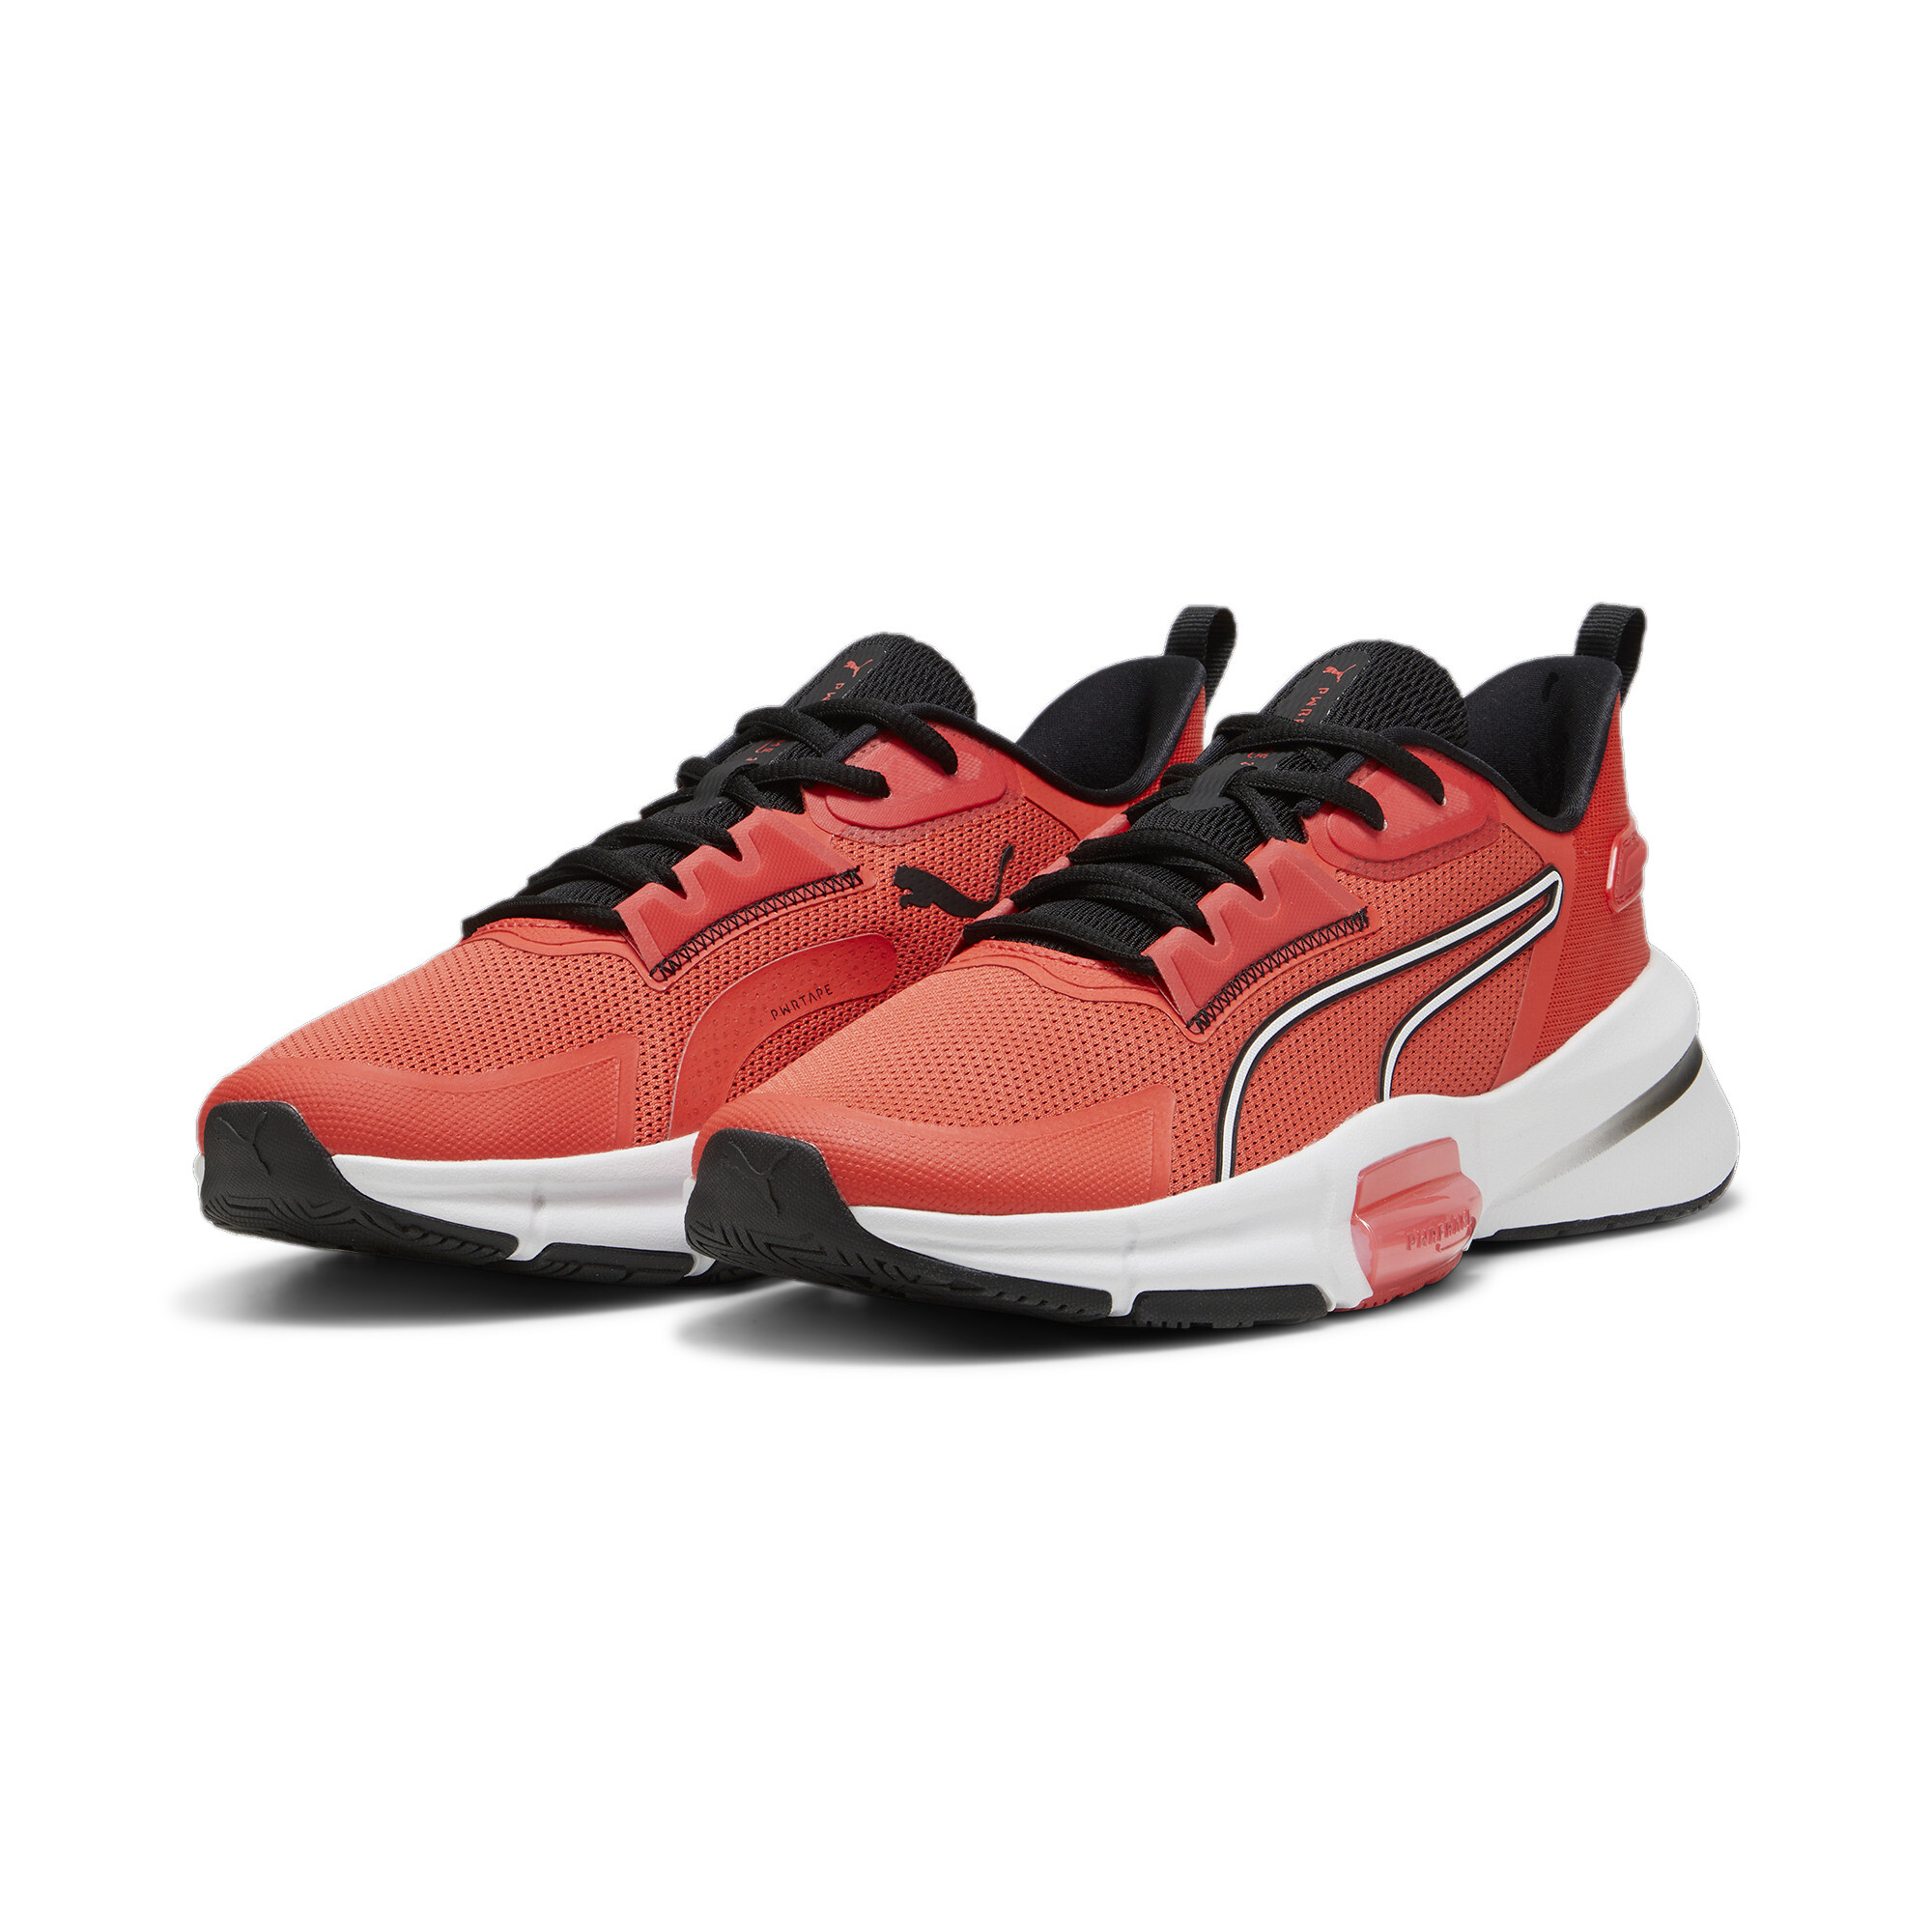 Men's PUMA PWRFrame TR 3 Training Shoes In Red, Size EU 40